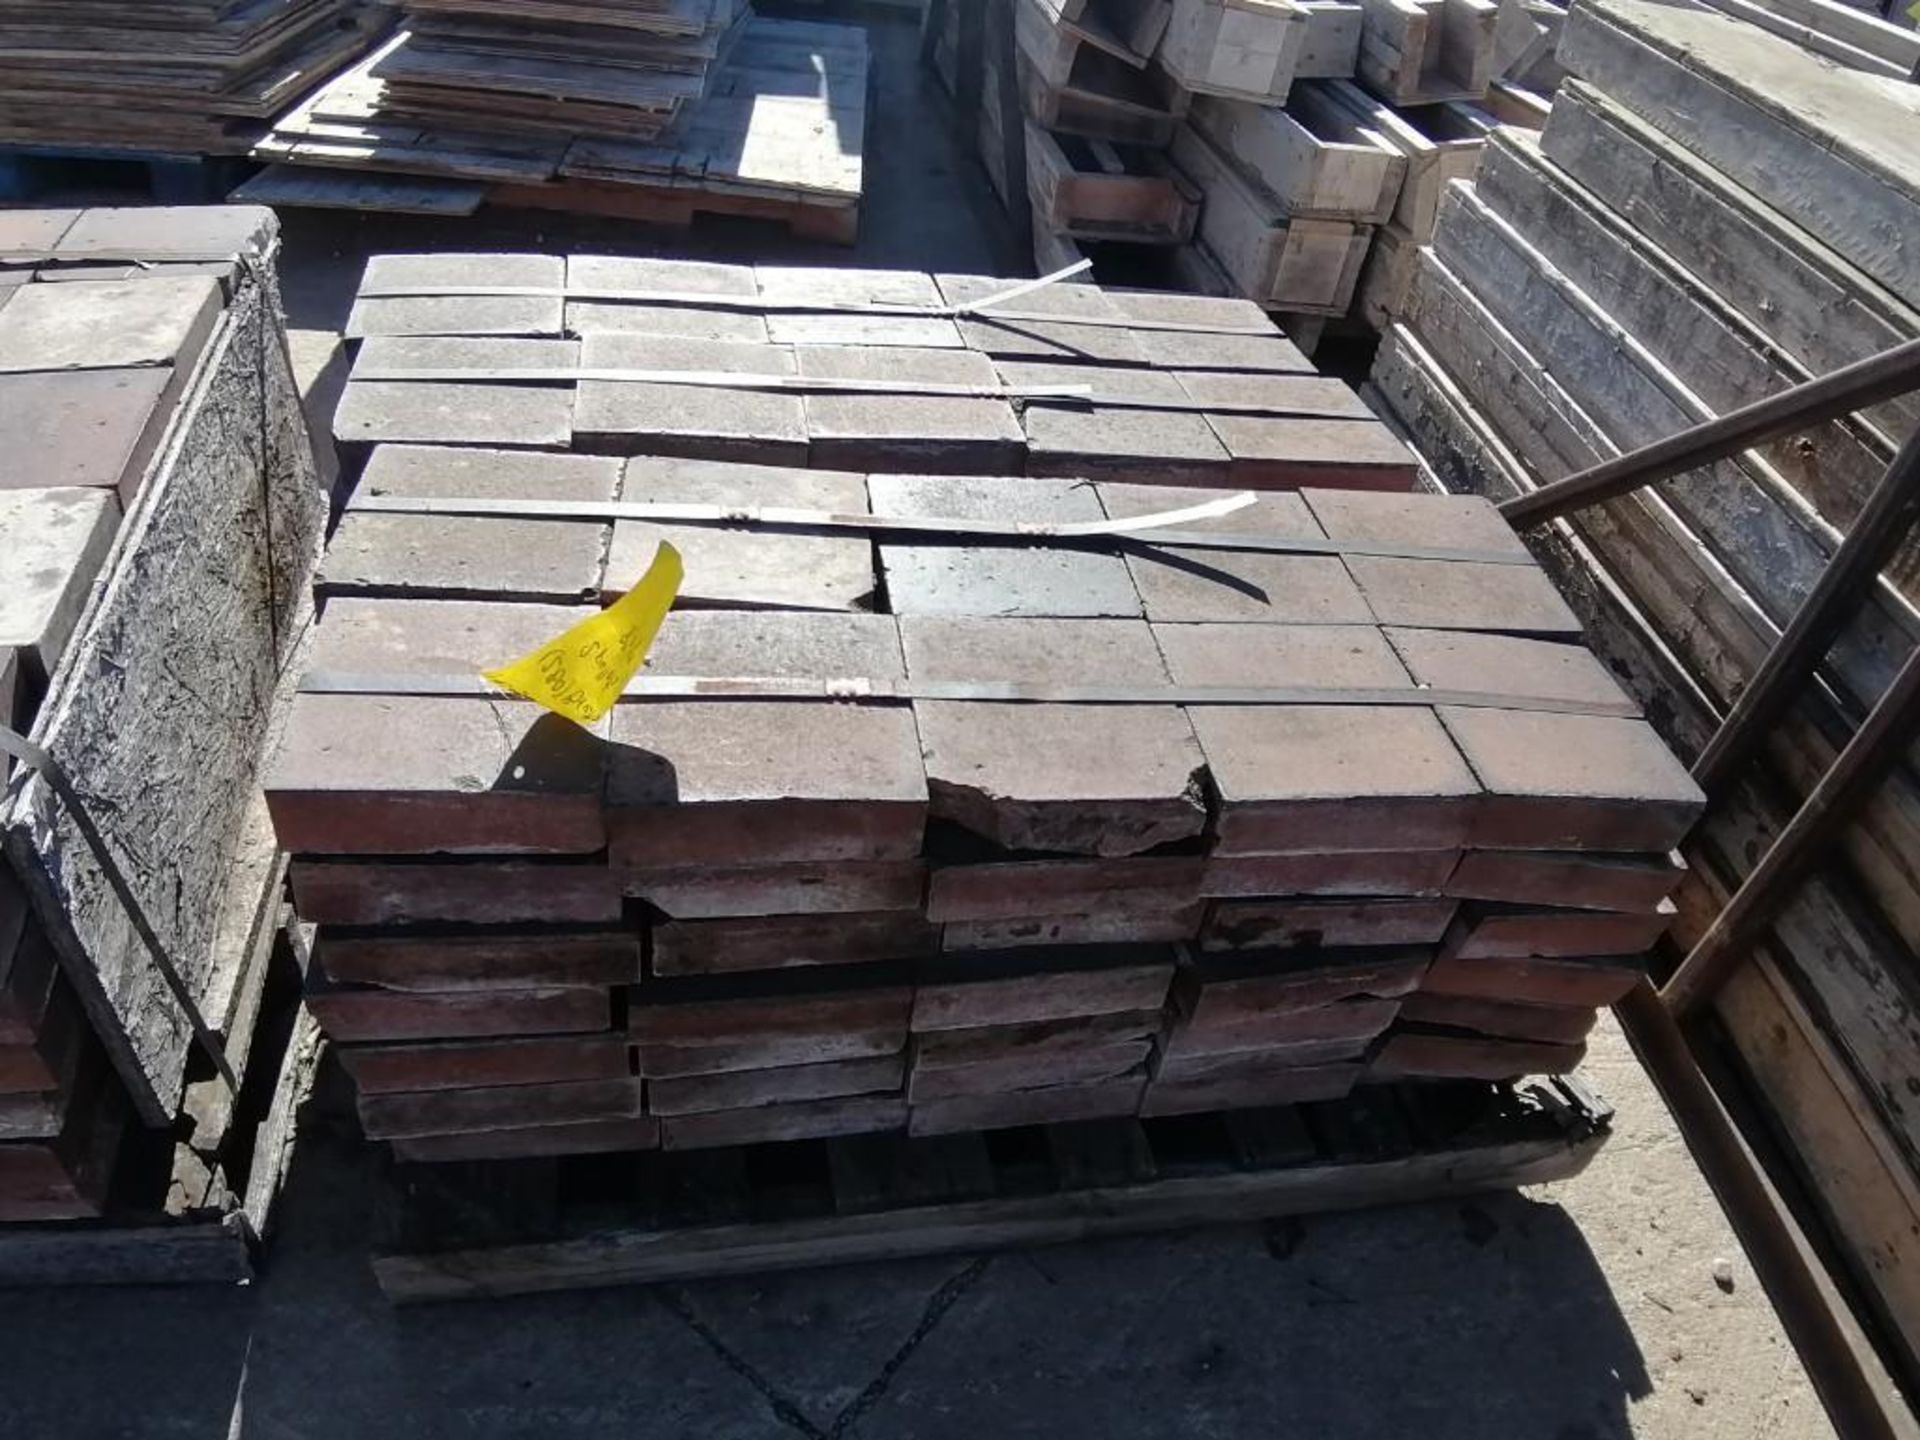 Lot of (2) Pallets with 280 total 8" x 8" Paving Bricks. Located in Hazelwood, MO. - Image 3 of 5